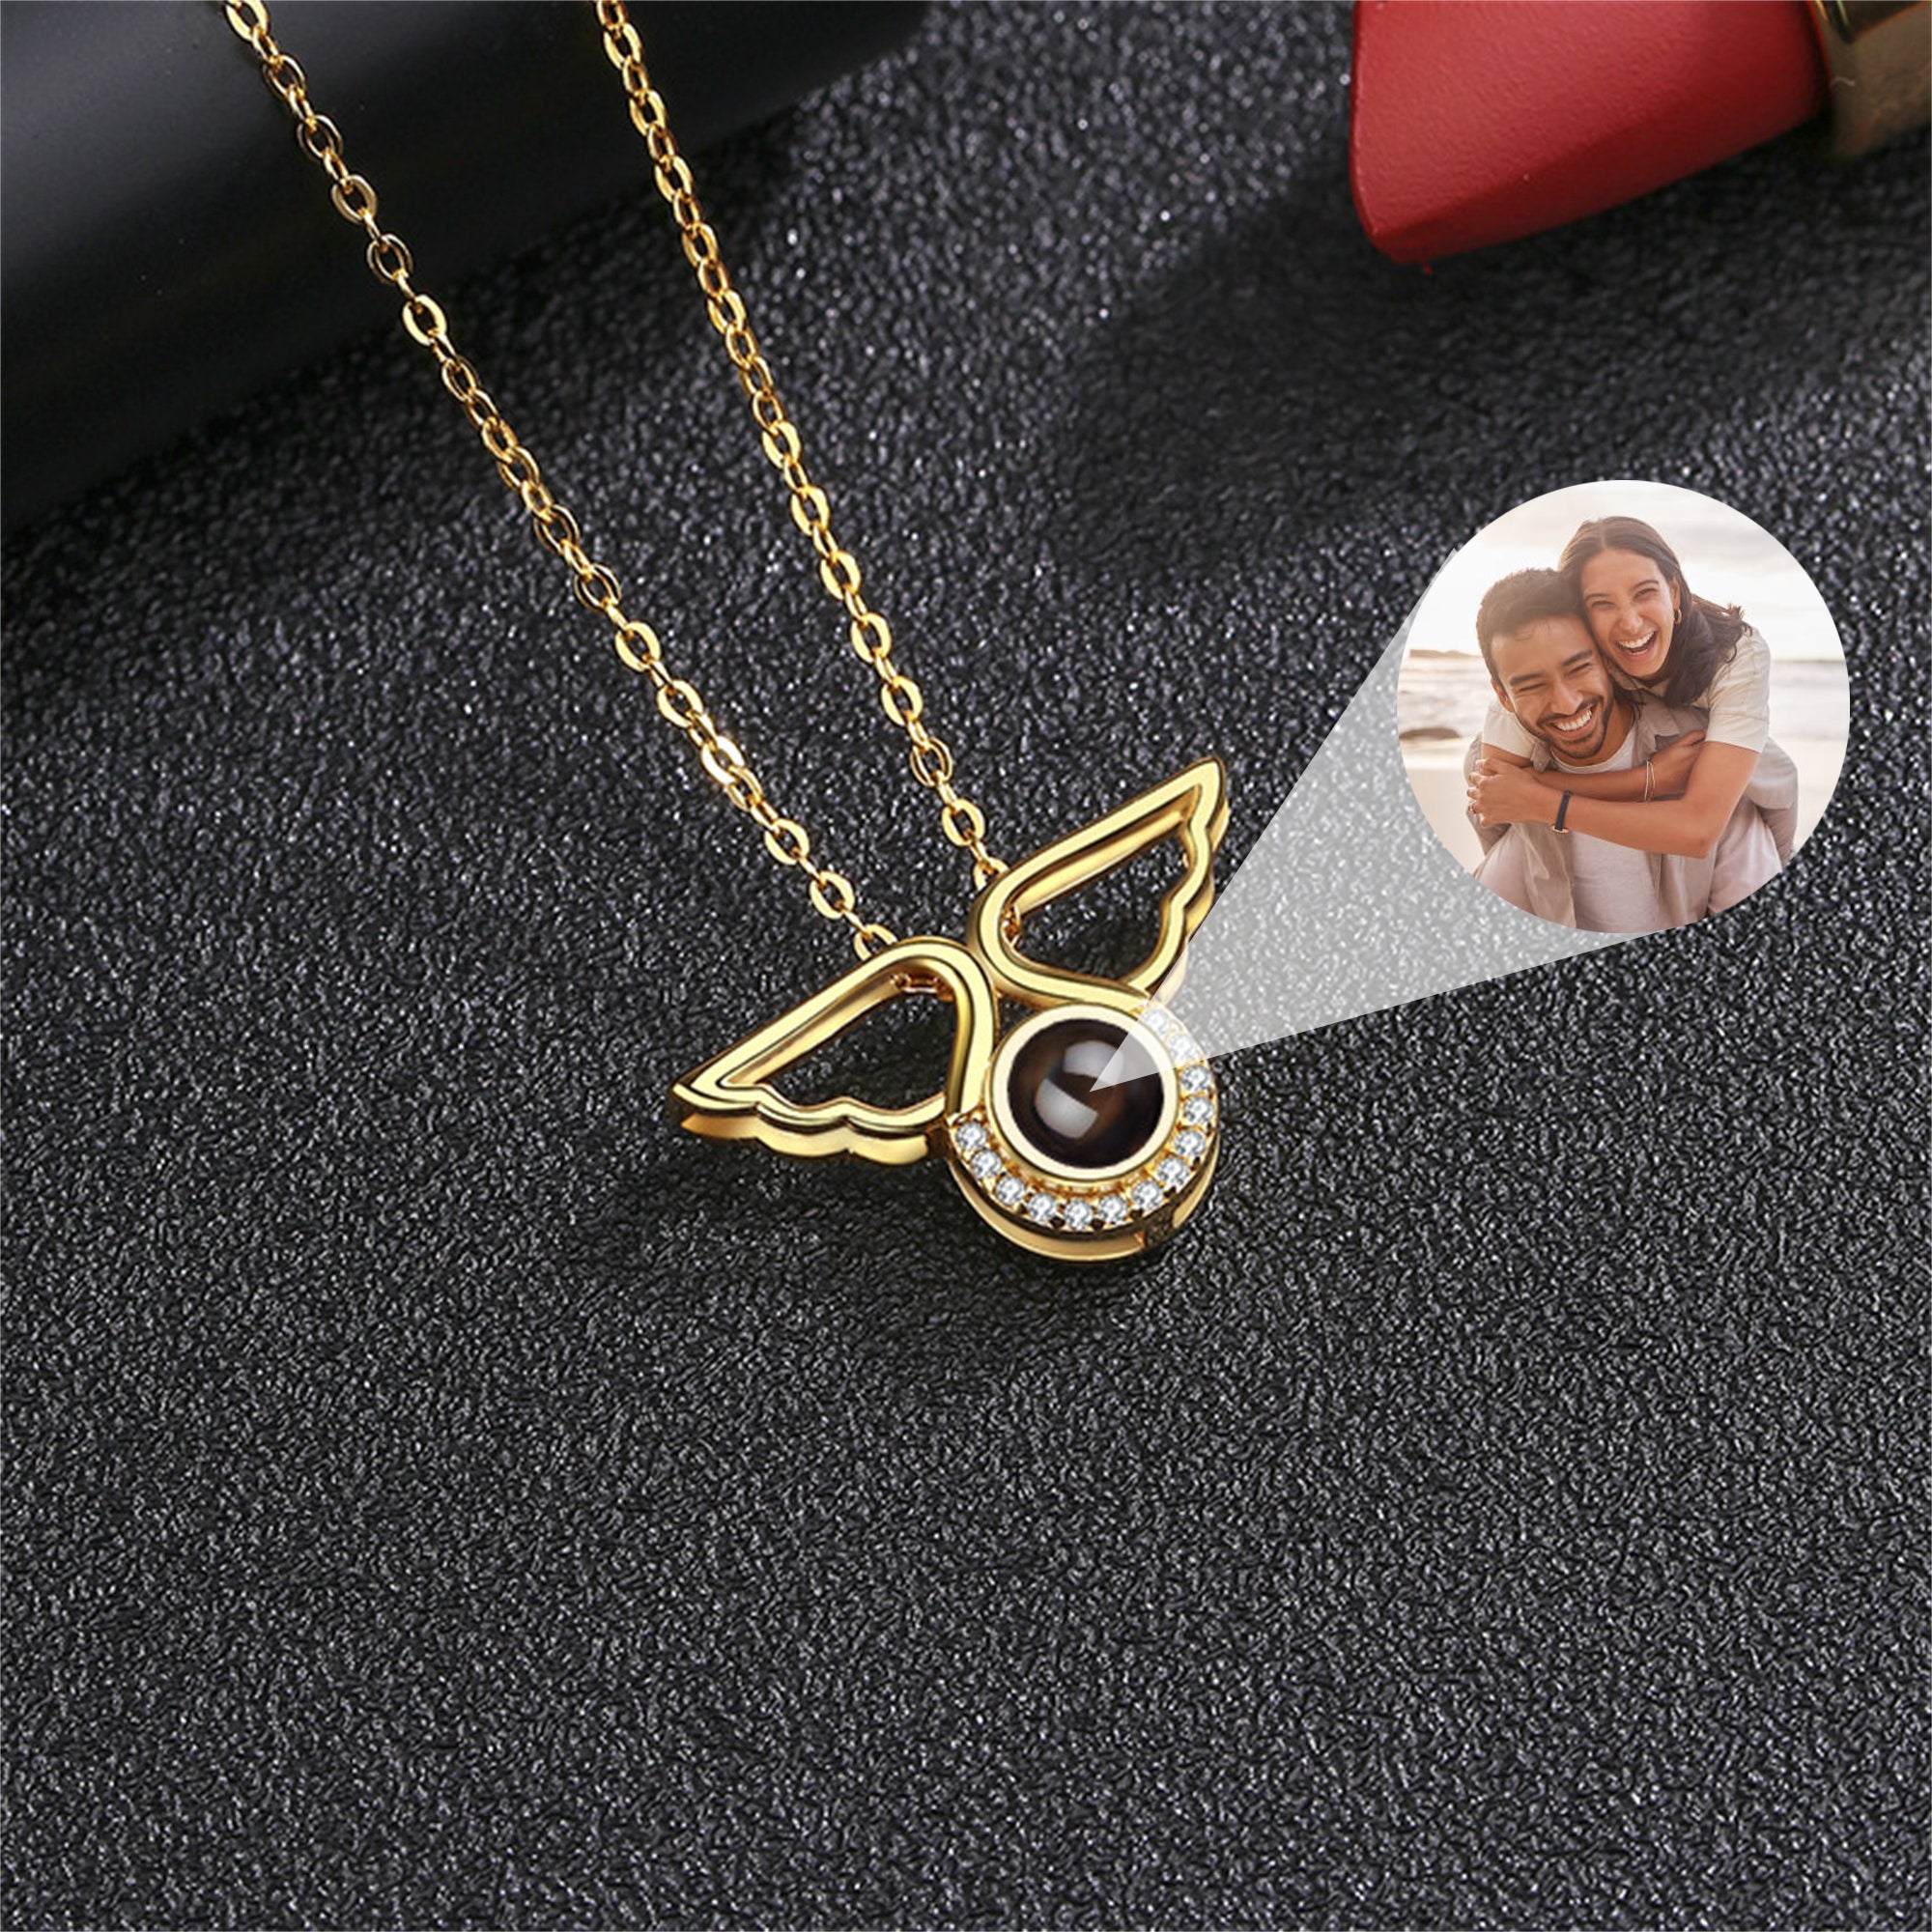 Personalized Angel Wing Projection Necklace, Customized Memorial Photo Pendant Jewelry